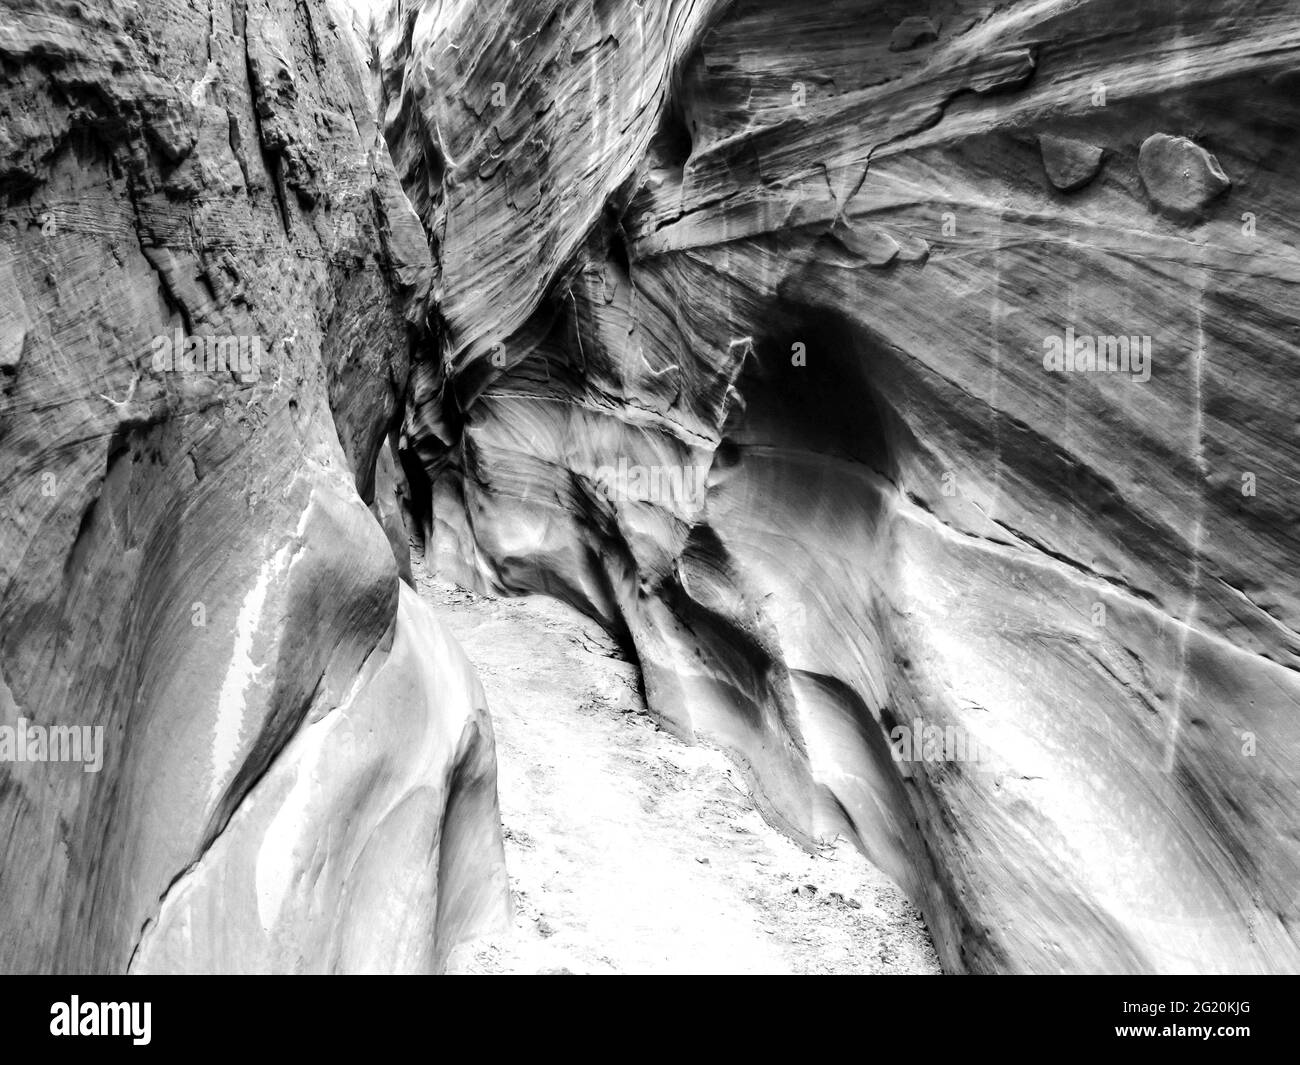 Cross-bedding on the steep cliffs of the Dry Fork slot canyon in in the Grand Staircase-Escalante National Monument, Utah, USA in black and white Stock Photo